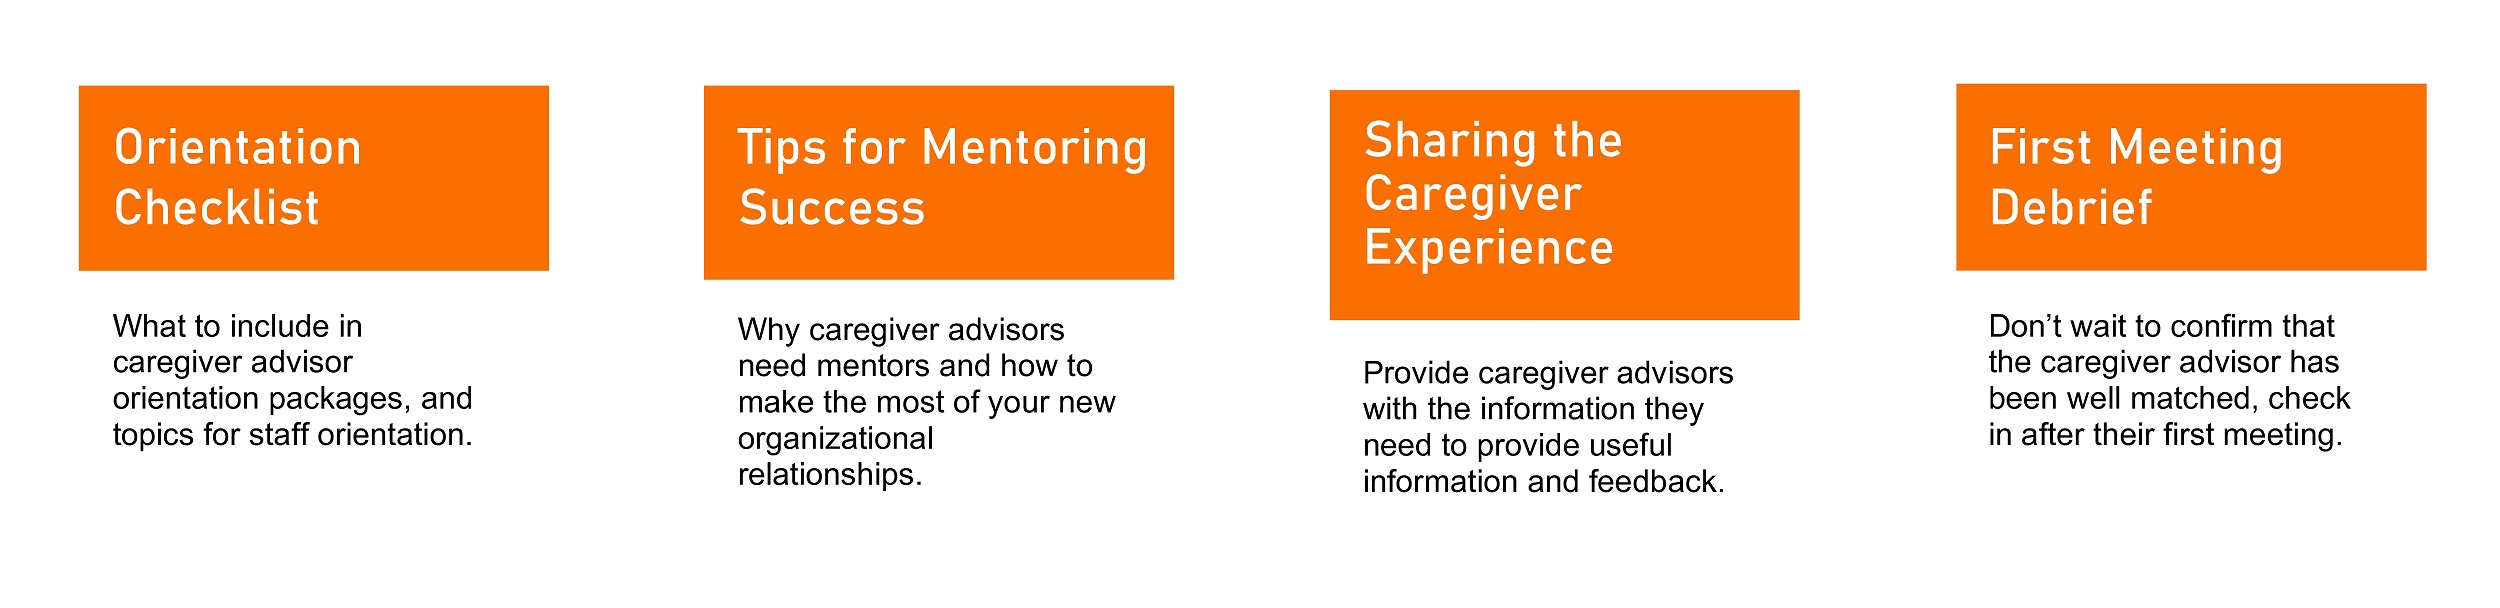 Orientation checklist; Tips for mentoring success; Sharing the caregiver experience; First meeting debrief